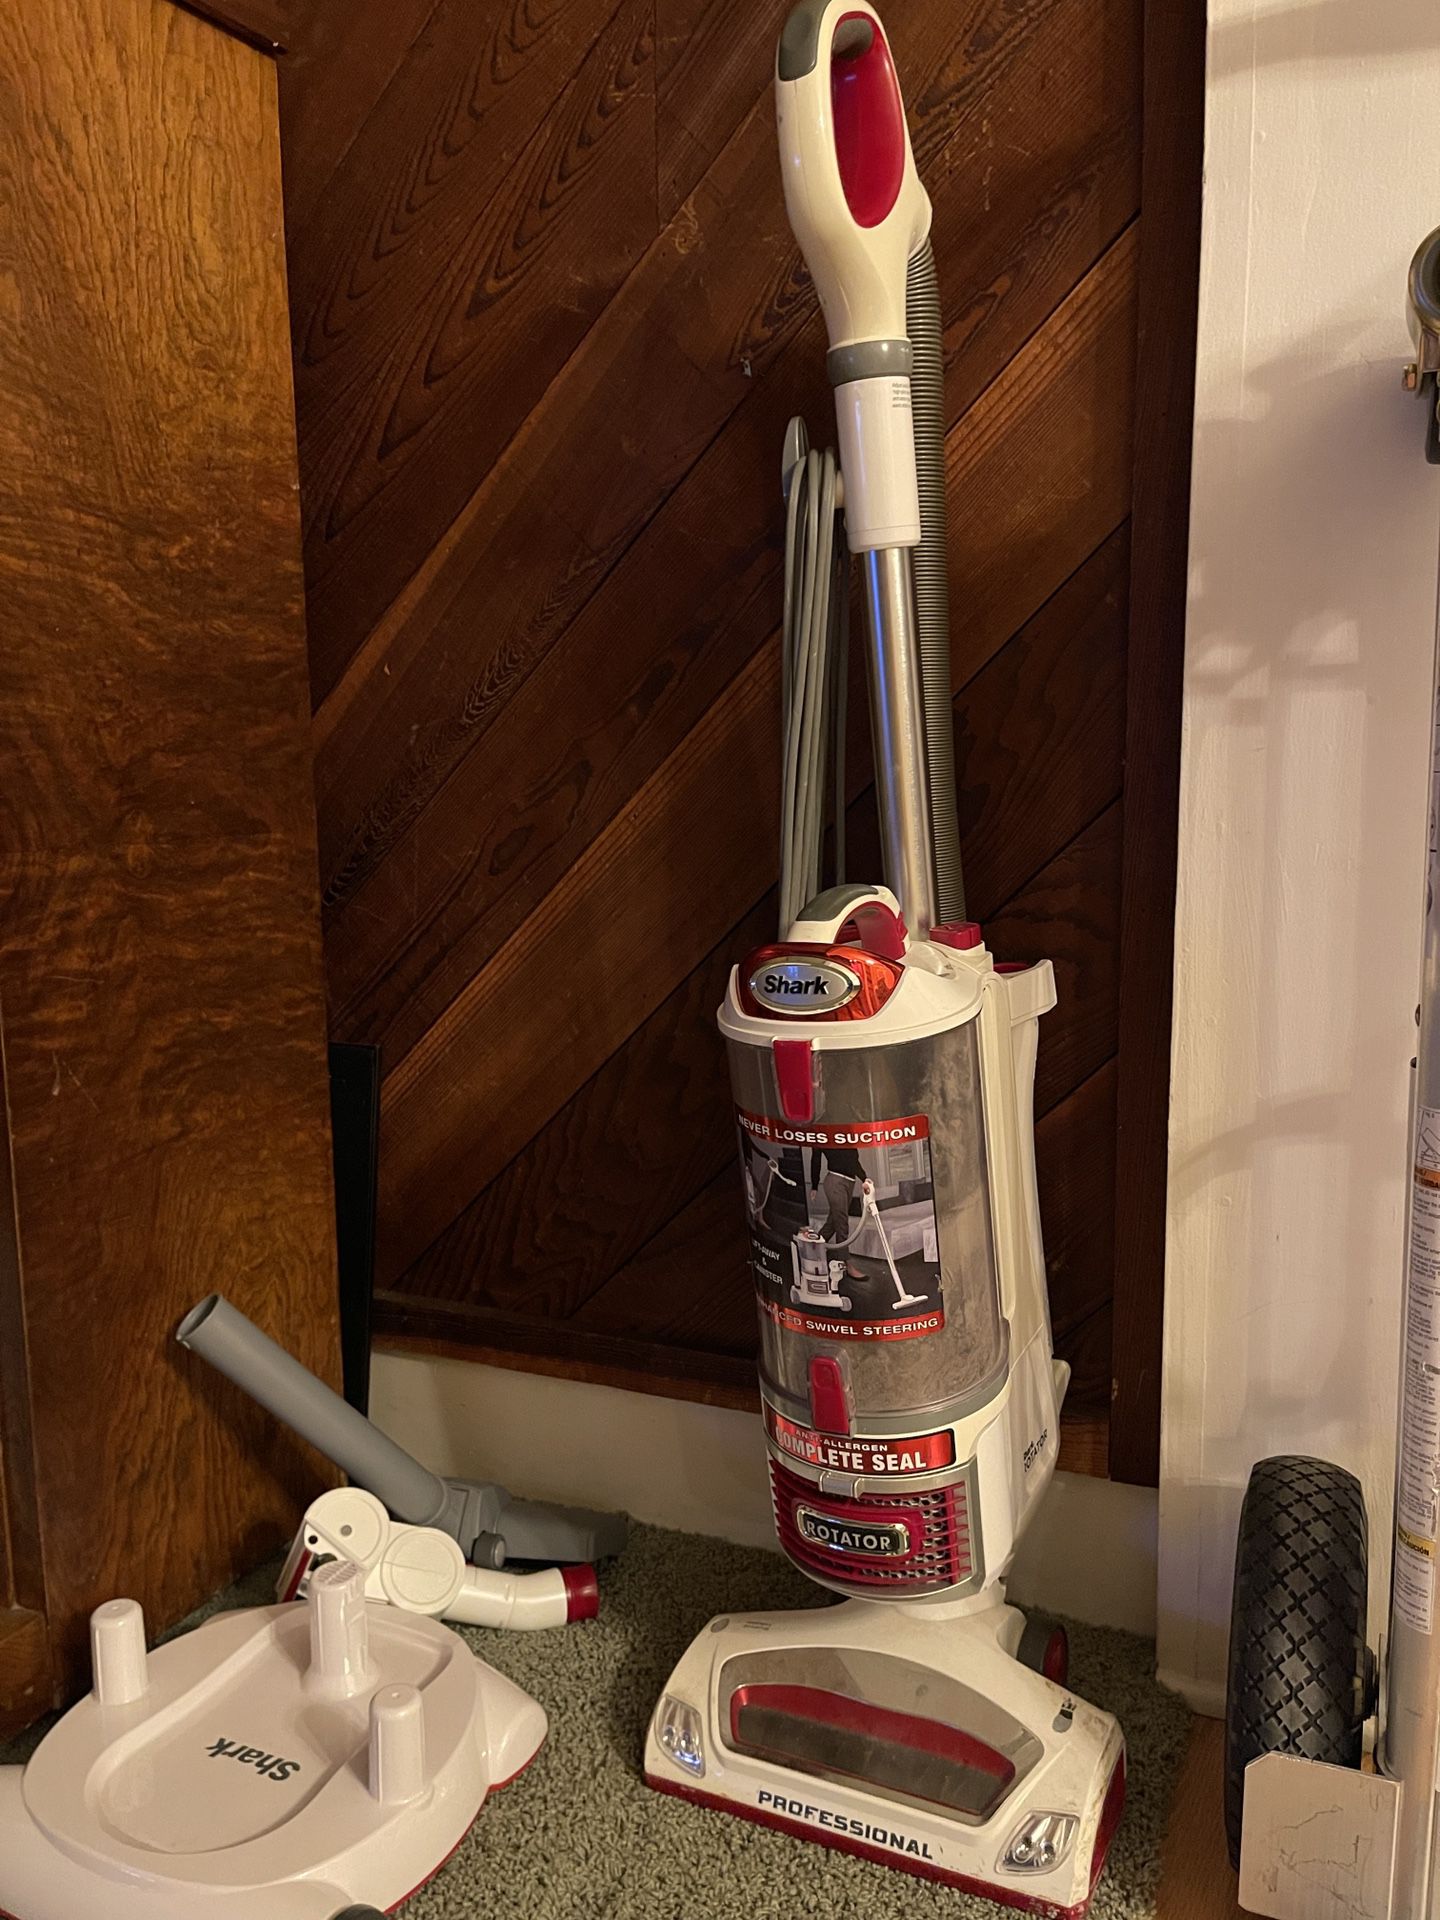 PERFECT MOTHERS DAY GIFT - SHARK VACUUM